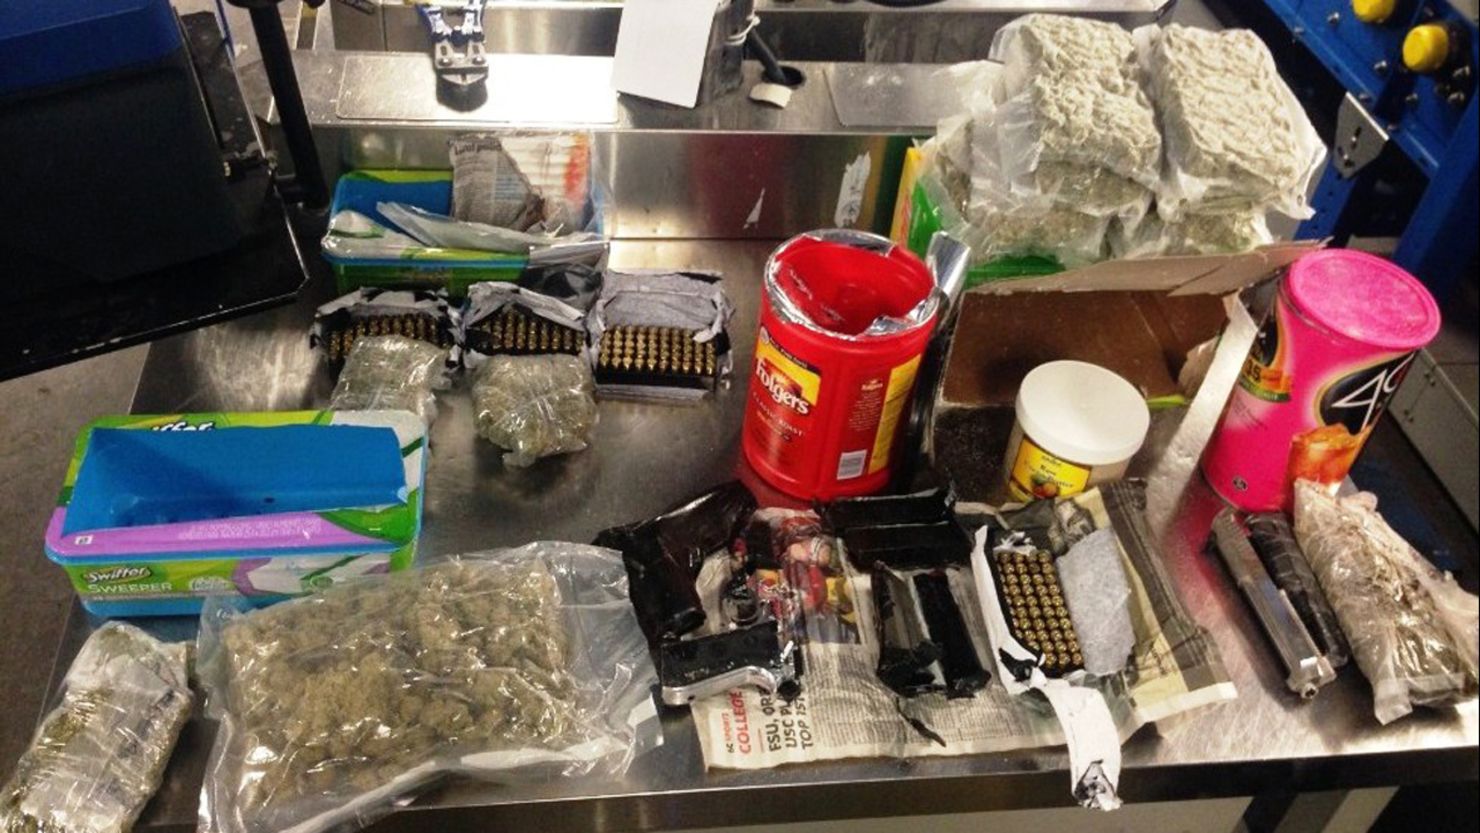 The TSA says a woman at John F. Kennedy International tried to smuggle weapons and marijuana in her luggage.